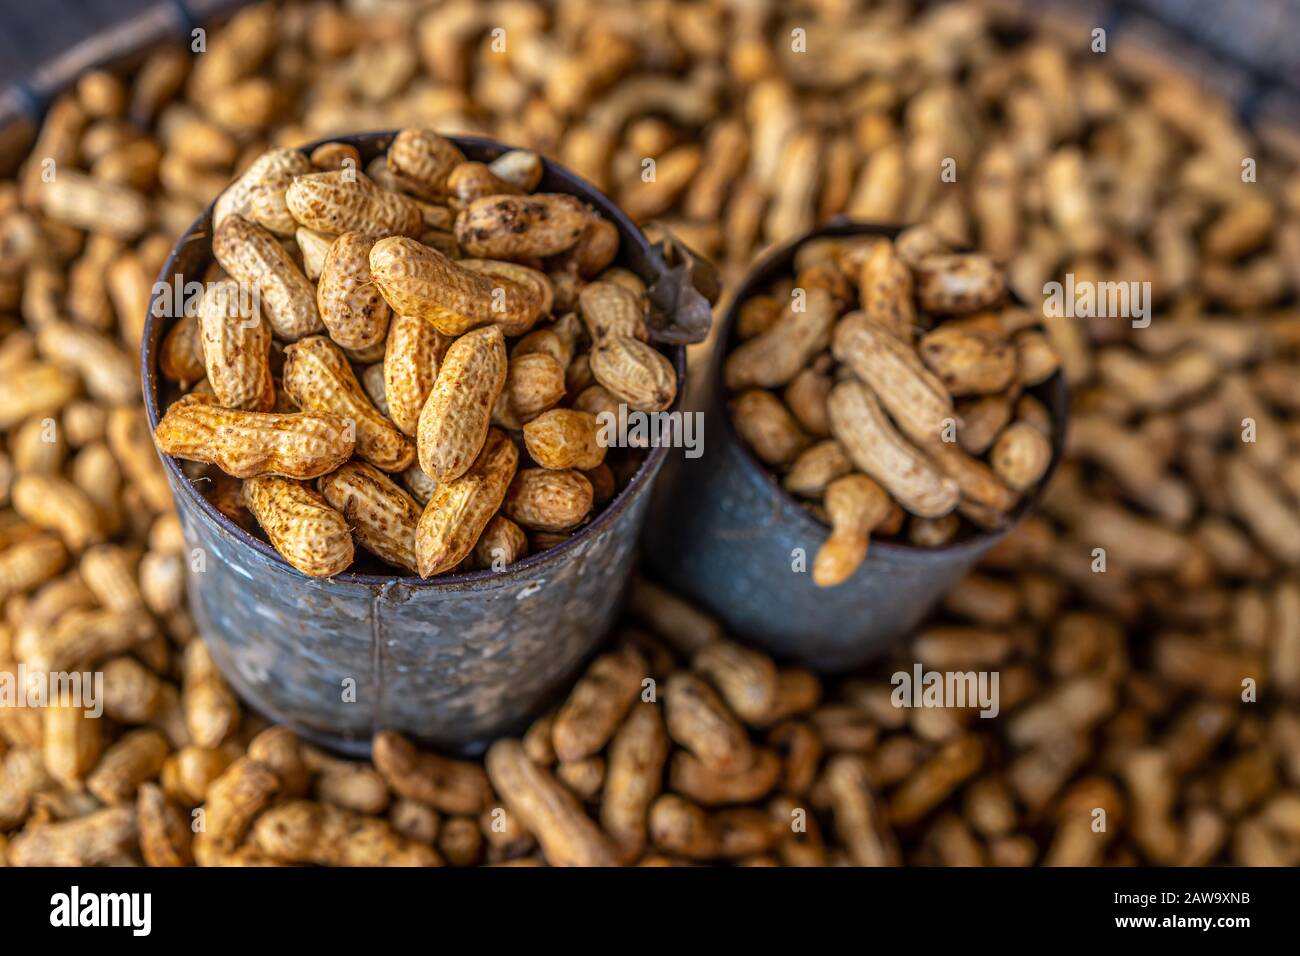 Harvested peanuts in shell sold at a fresh market Stock Photo